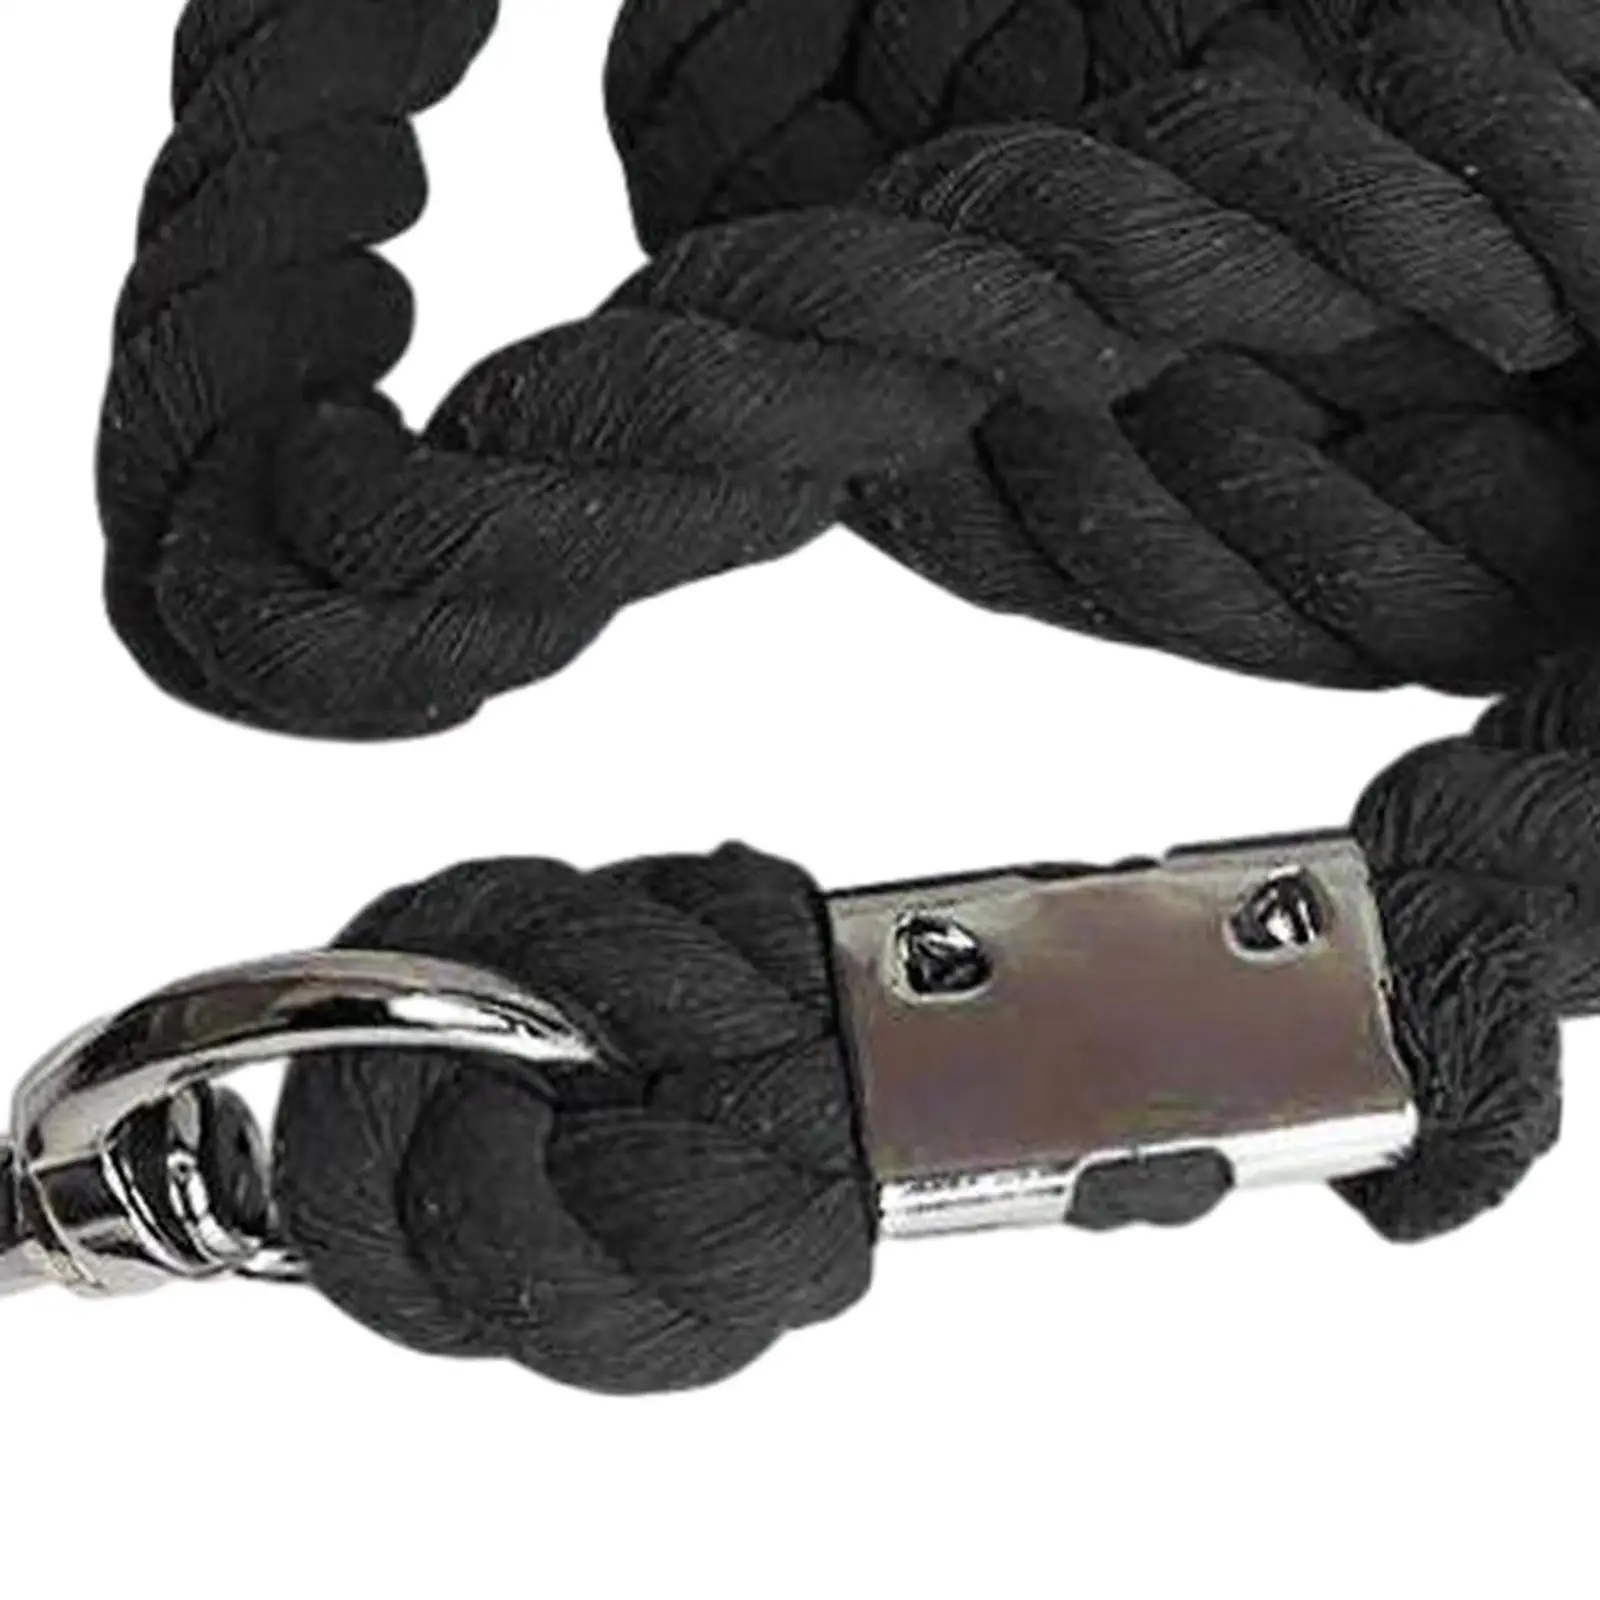 Ribbon horse rope. Horse rope accessory. Halters for equestrian reins